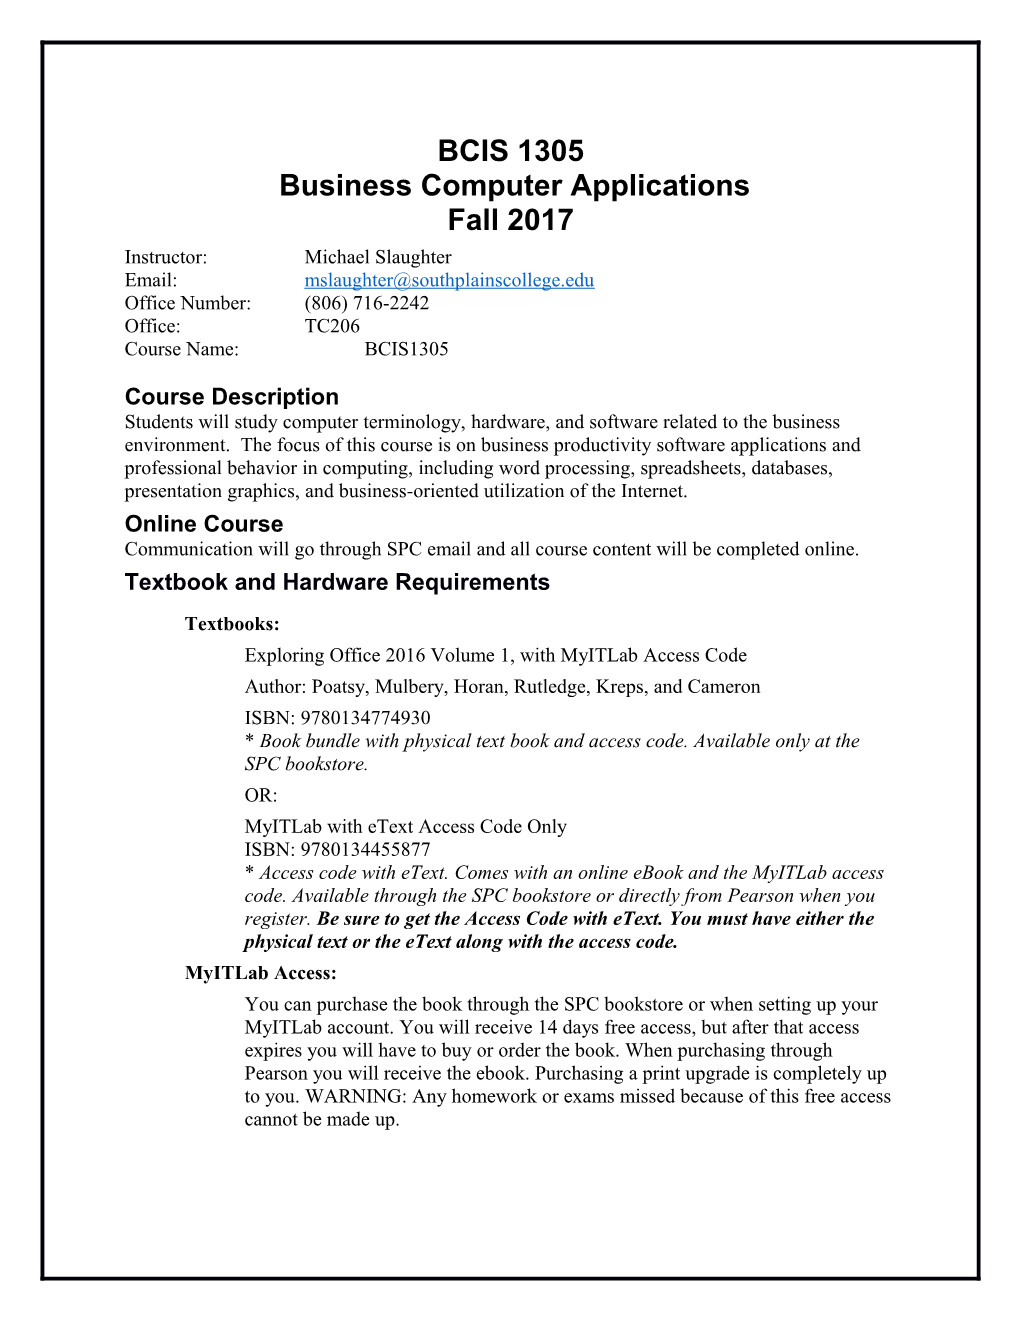 BCIS 1305 Business Computer Applications Fall 2017